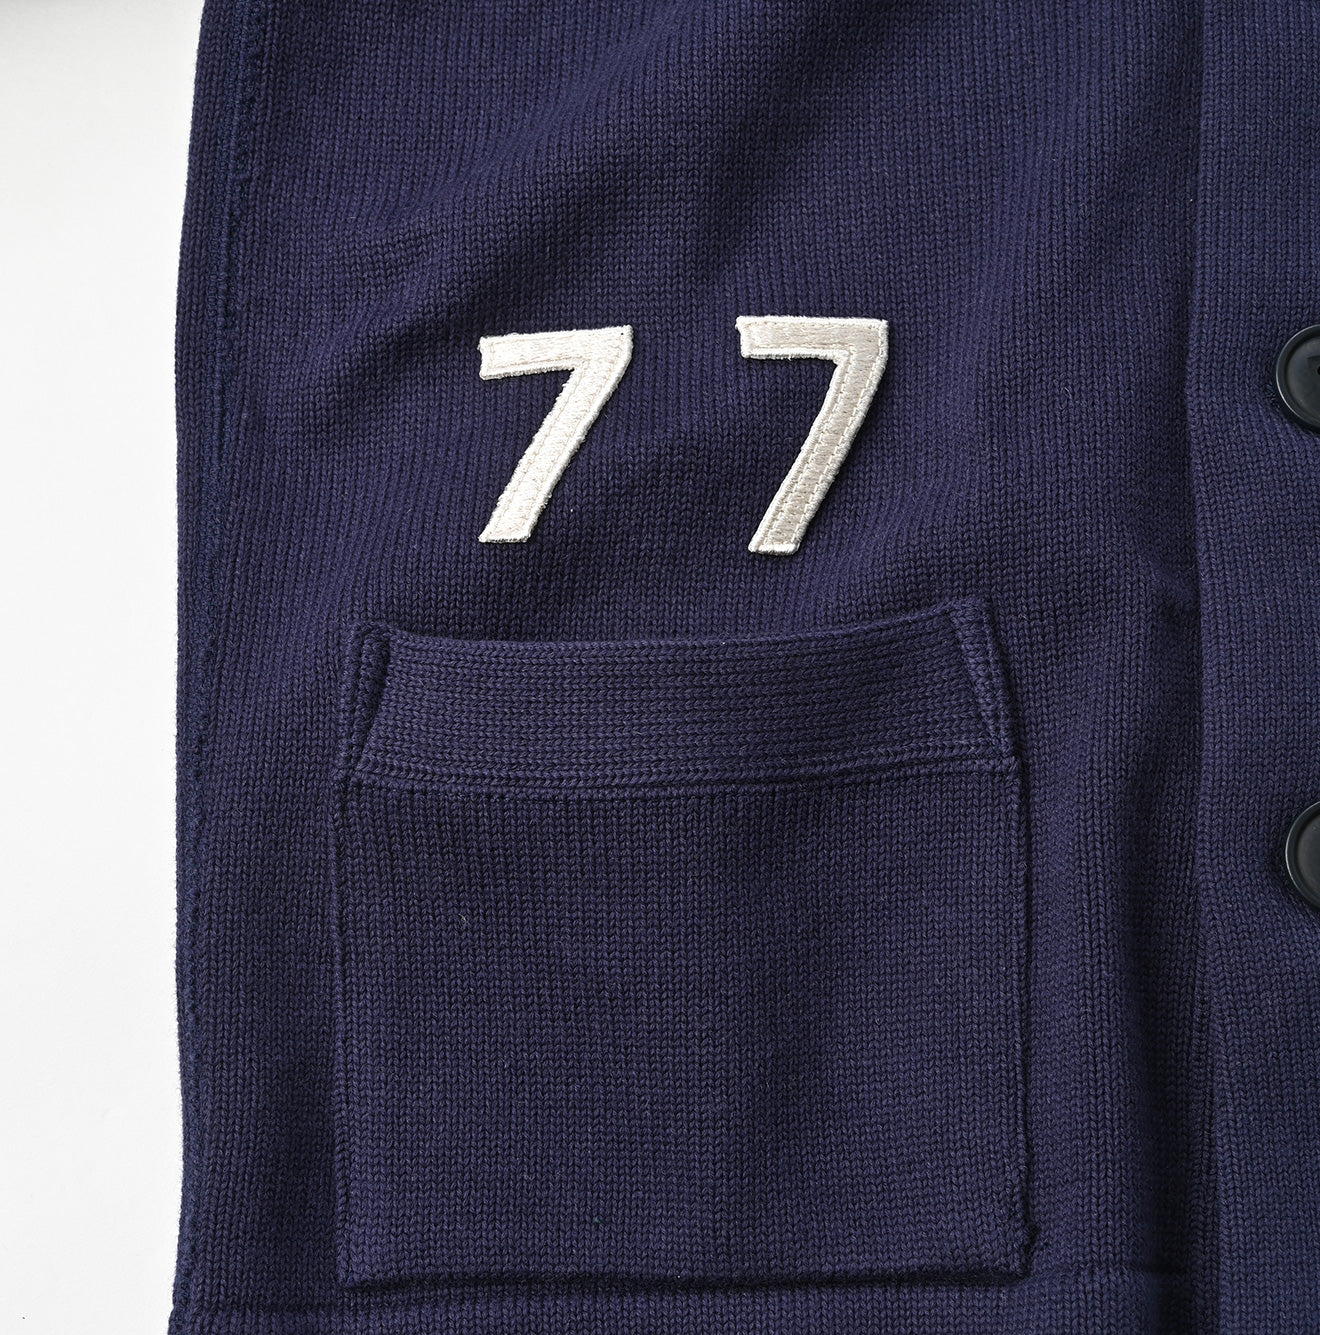 45R 77 Knit-sewn 908 Lettered Cardigan